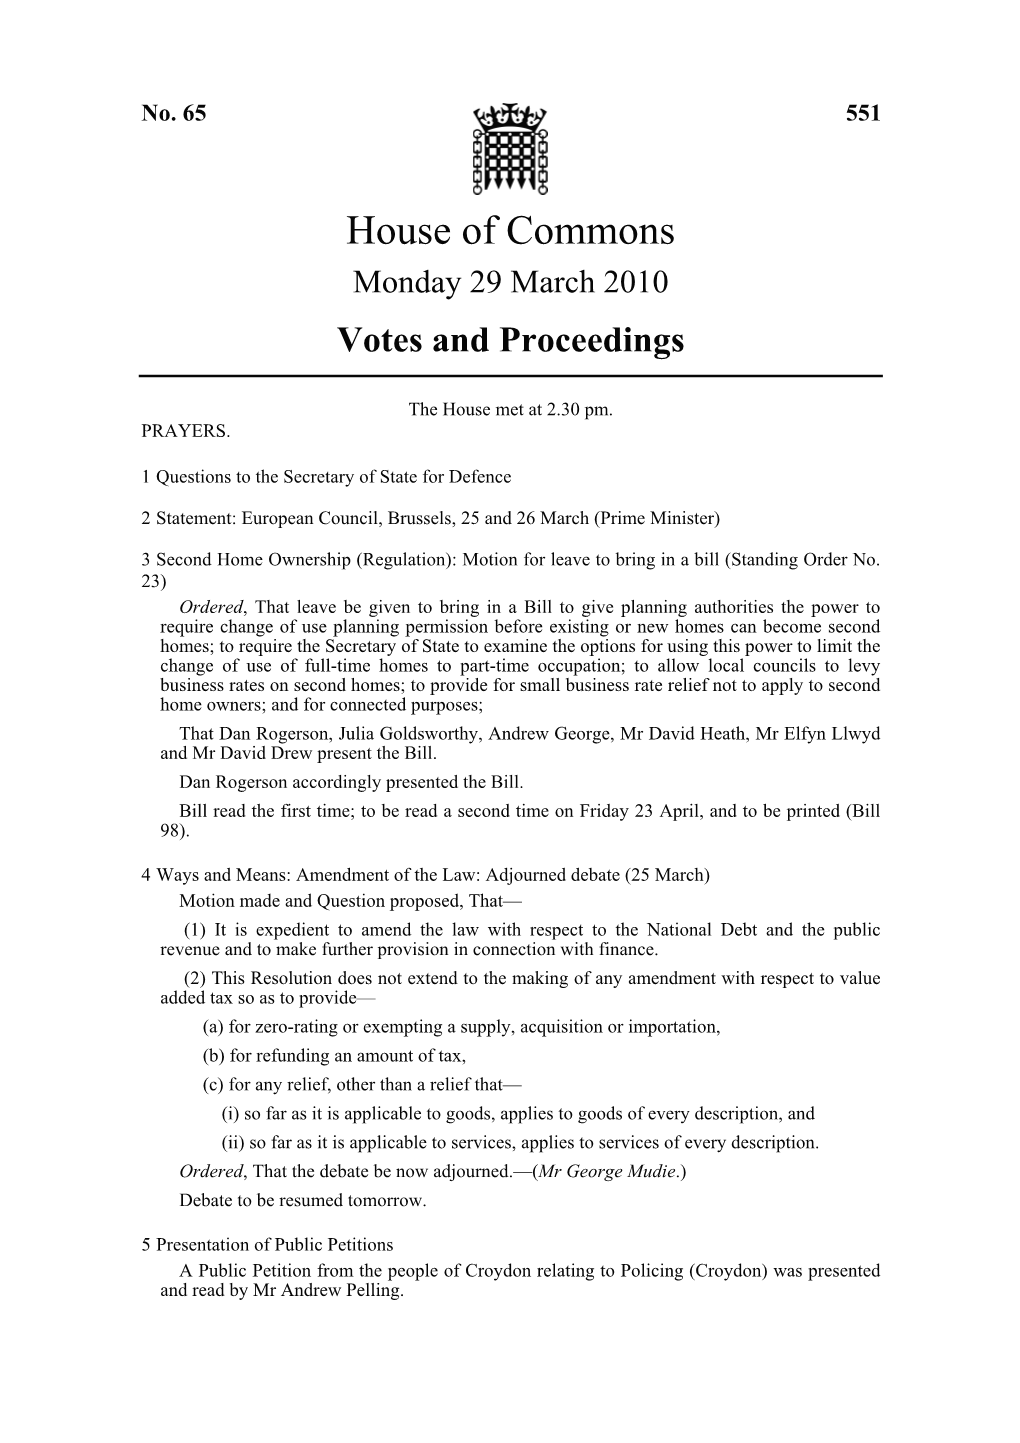 House of Commons Monday 29 March 2010 Votes and Proceedings